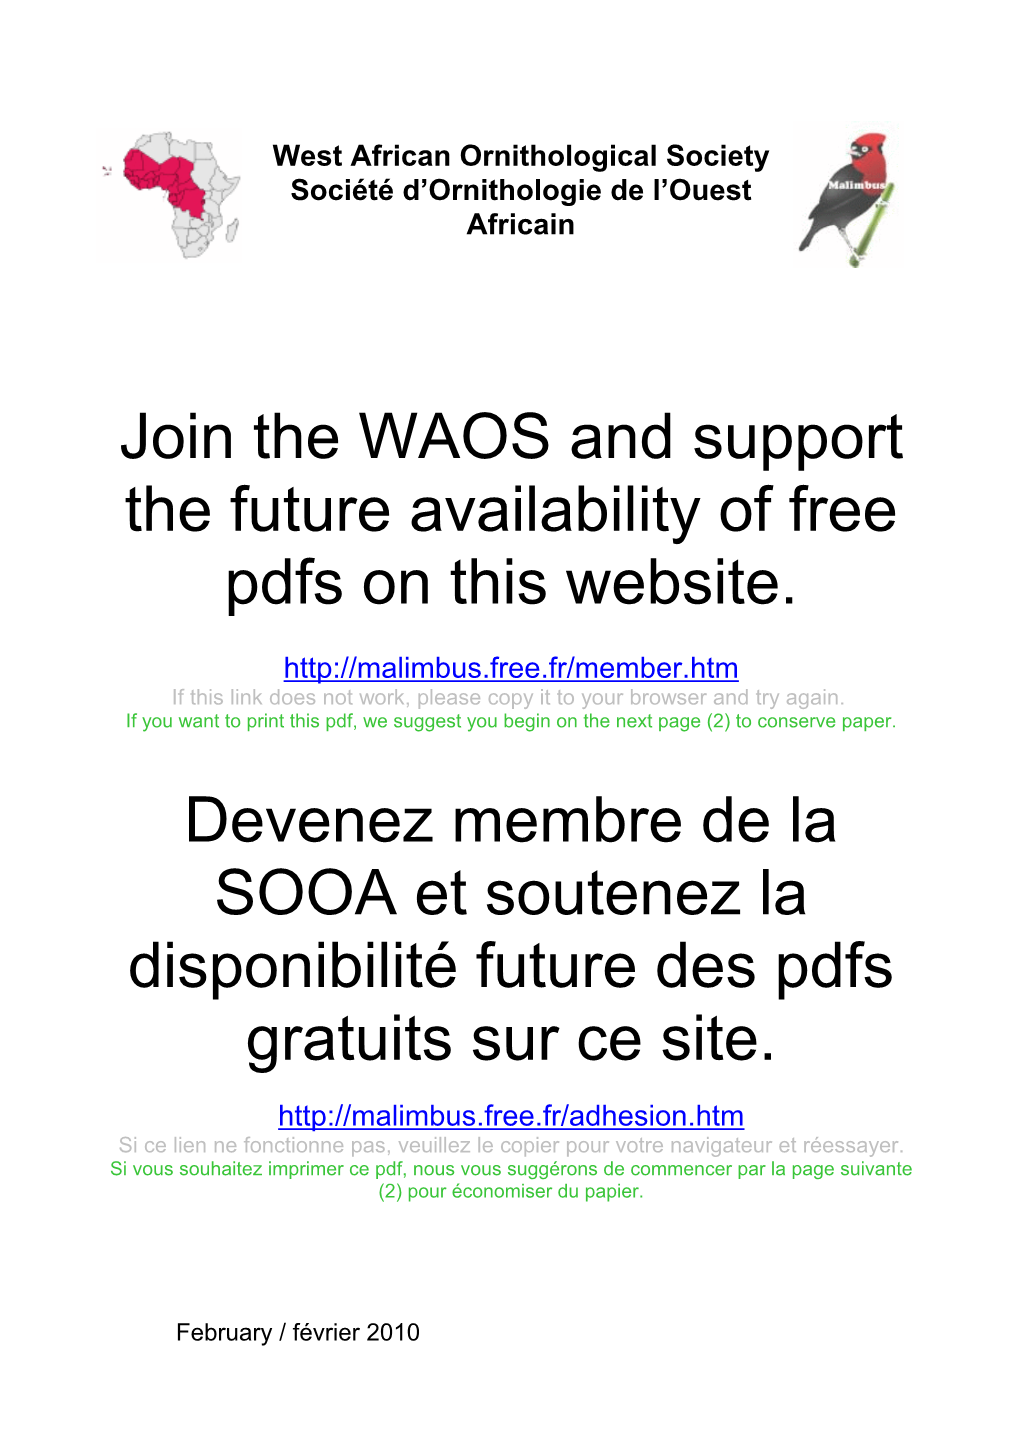 Join the WAOS and Support the Future Availability of Free Pdfs on This Website